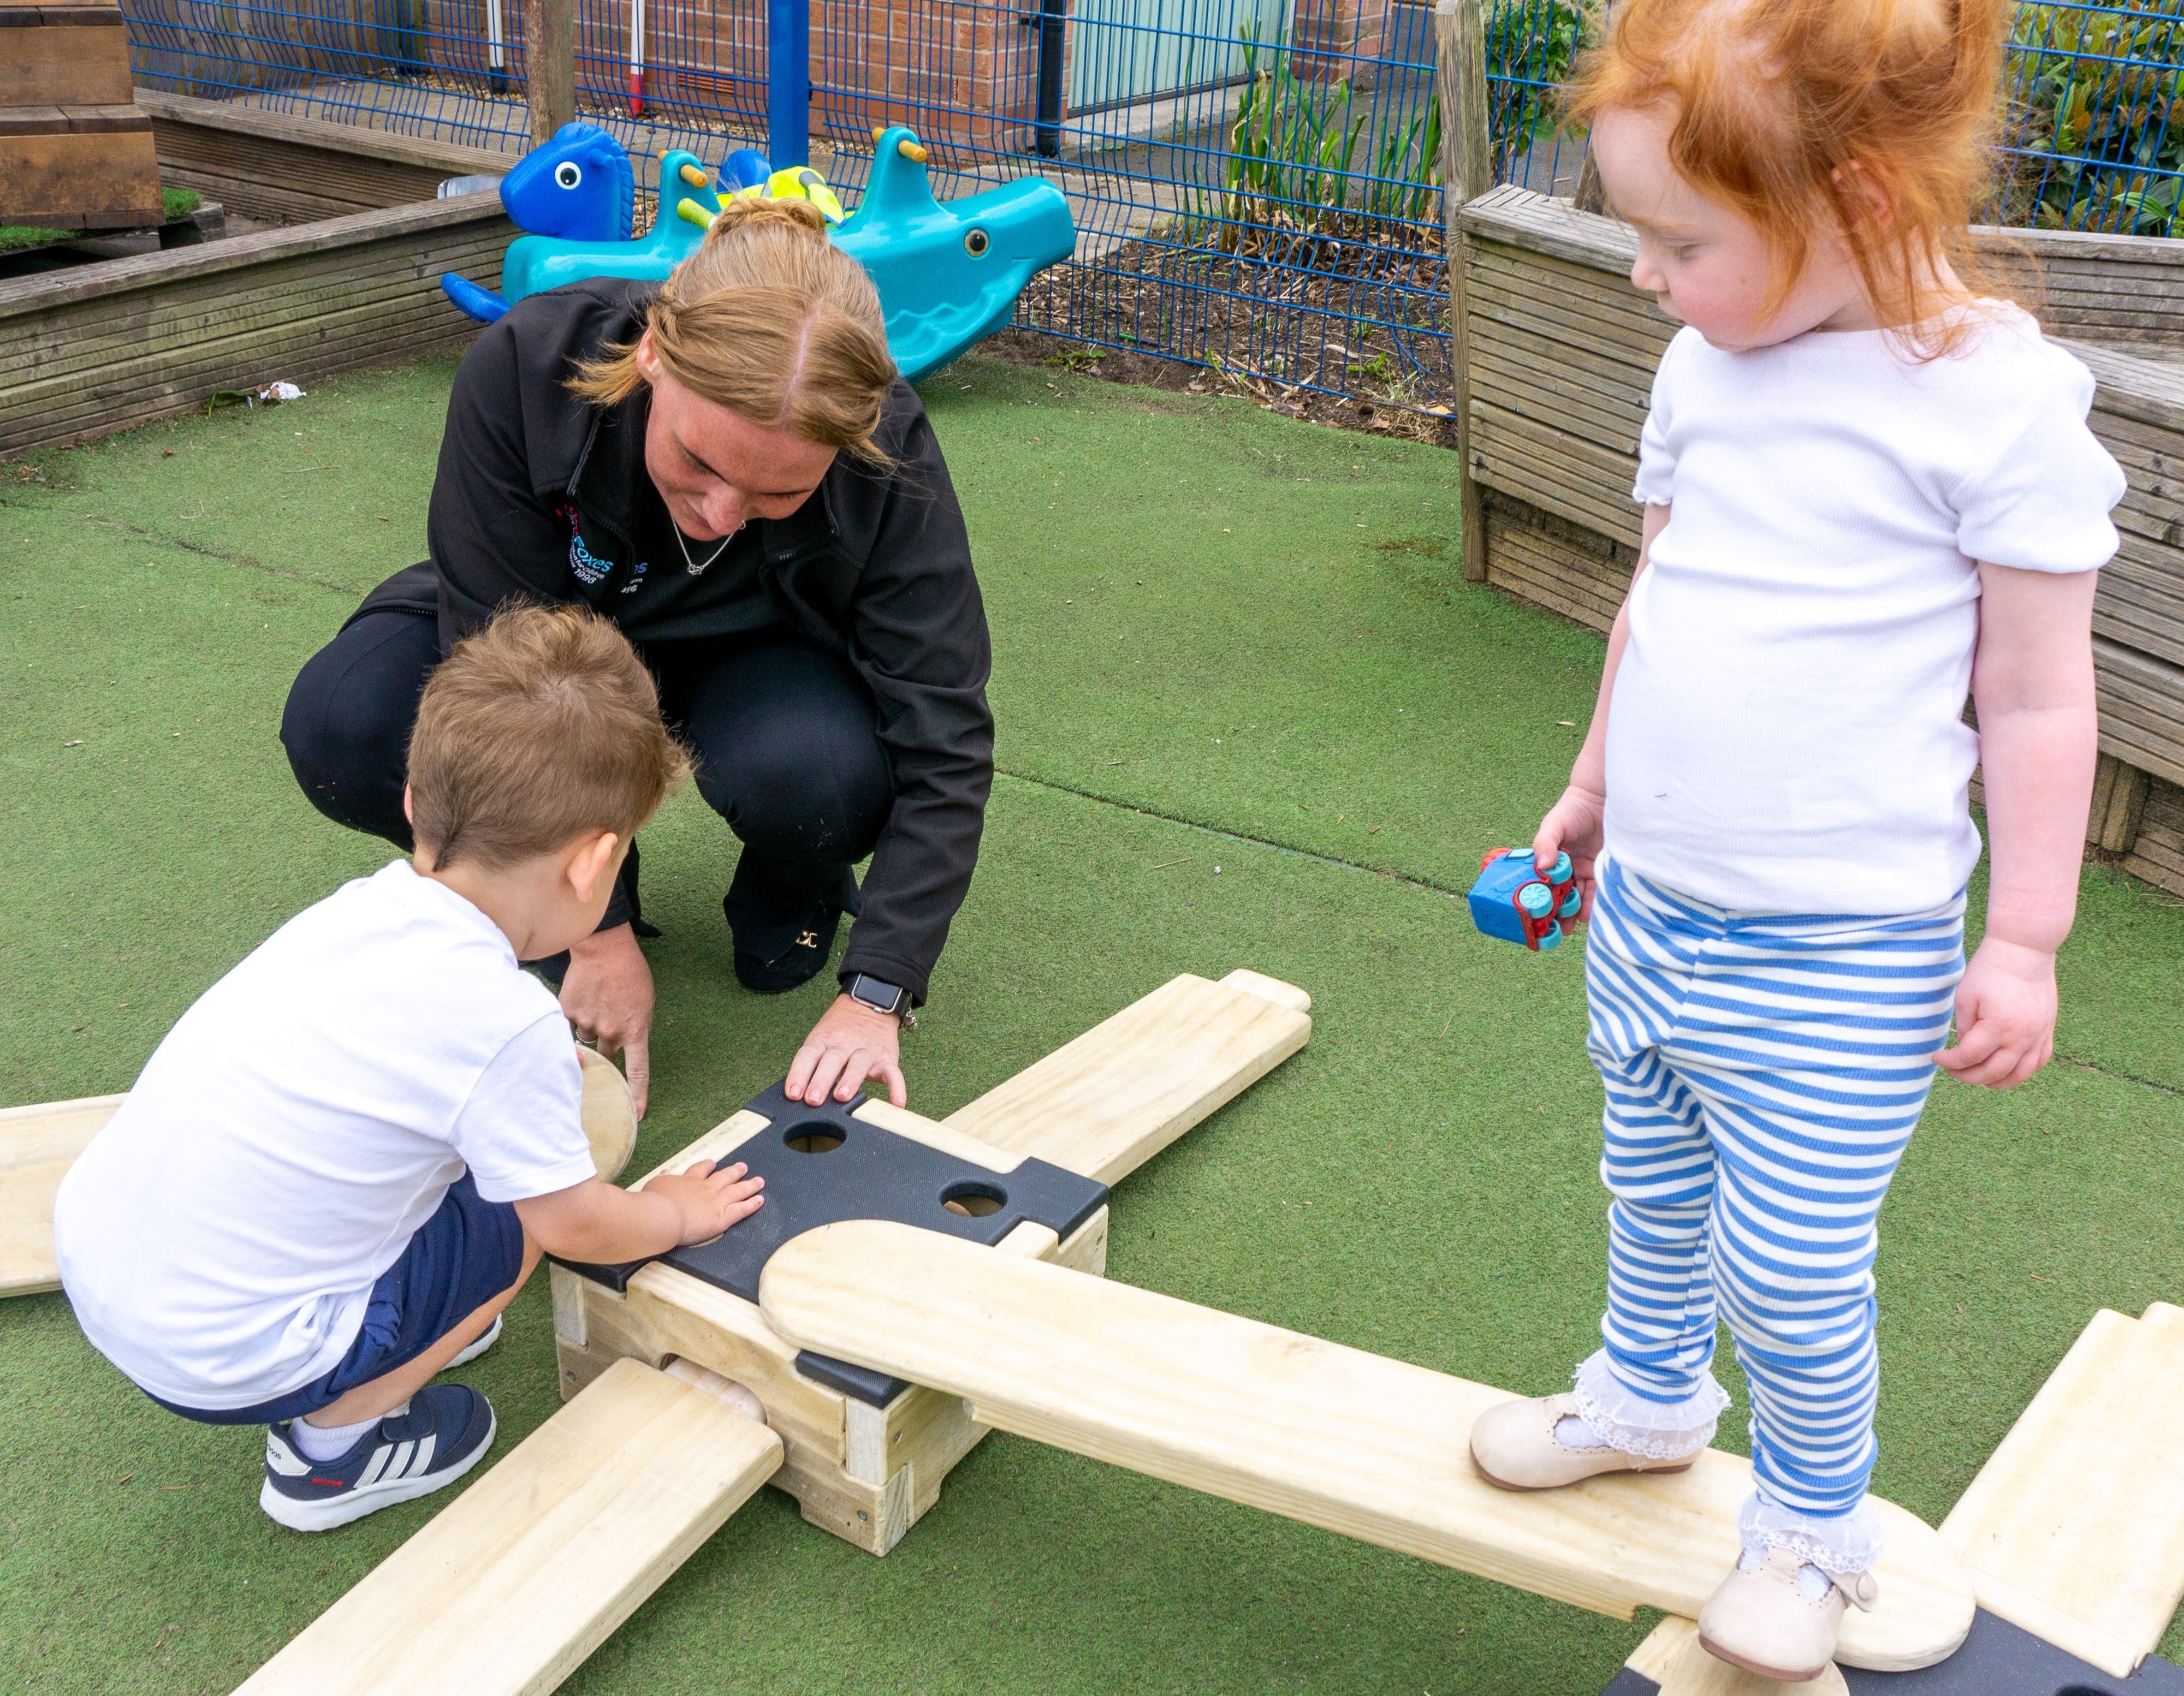 2 children are watching a teacher show them how to connect the wooden planks to the wooden blocks that are a part of the Play Builder Apprentice set. One child is knelt down, getting close to the teacher. The other child is stood on a wooden plank and is watching from above.